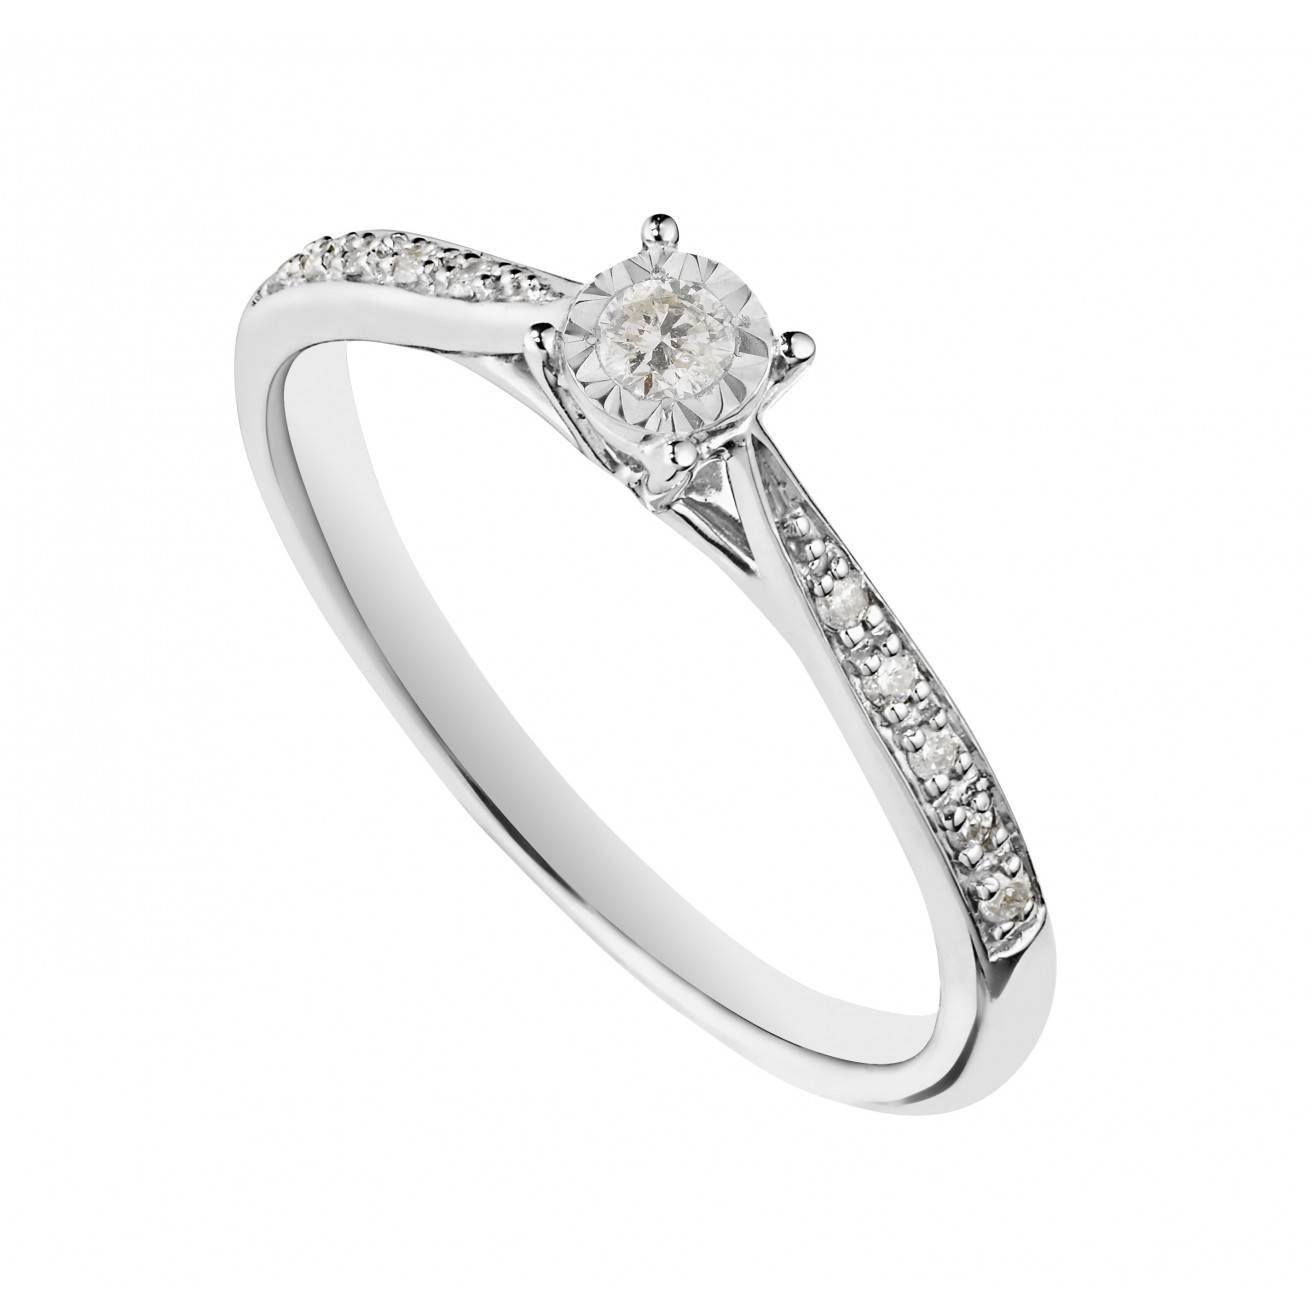 Buy Diamond Engagement Rings Online – Fraser Hart With White Gold And Diamond Wedding Rings (View 4 of 15)